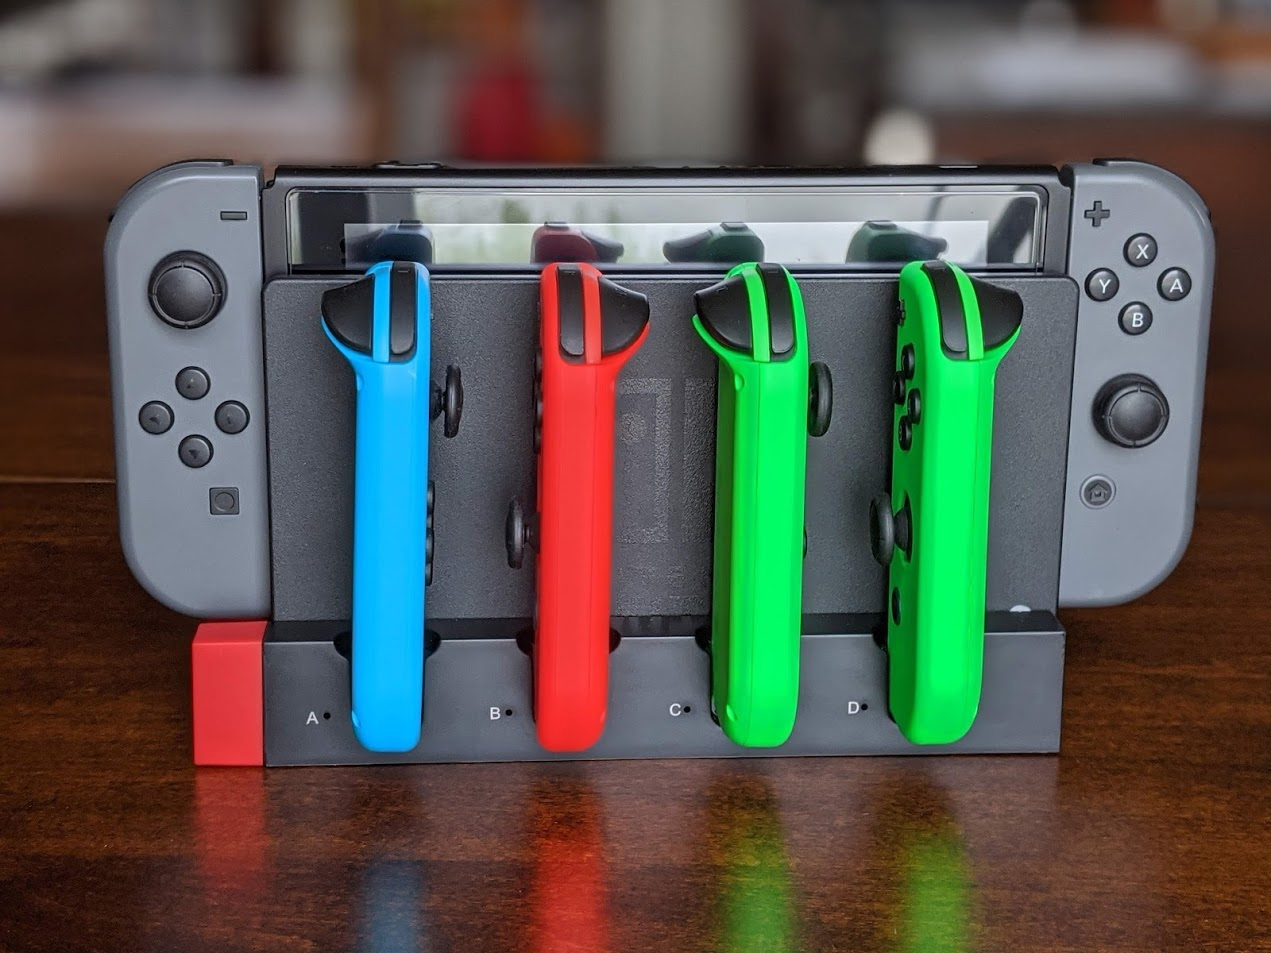 Påhængsmotor repertoire Dødelig iPega Joy-Con Charging Dock for Nintendo Switch review: The tidiest way to  charge your extra Joy-Cons | iMore